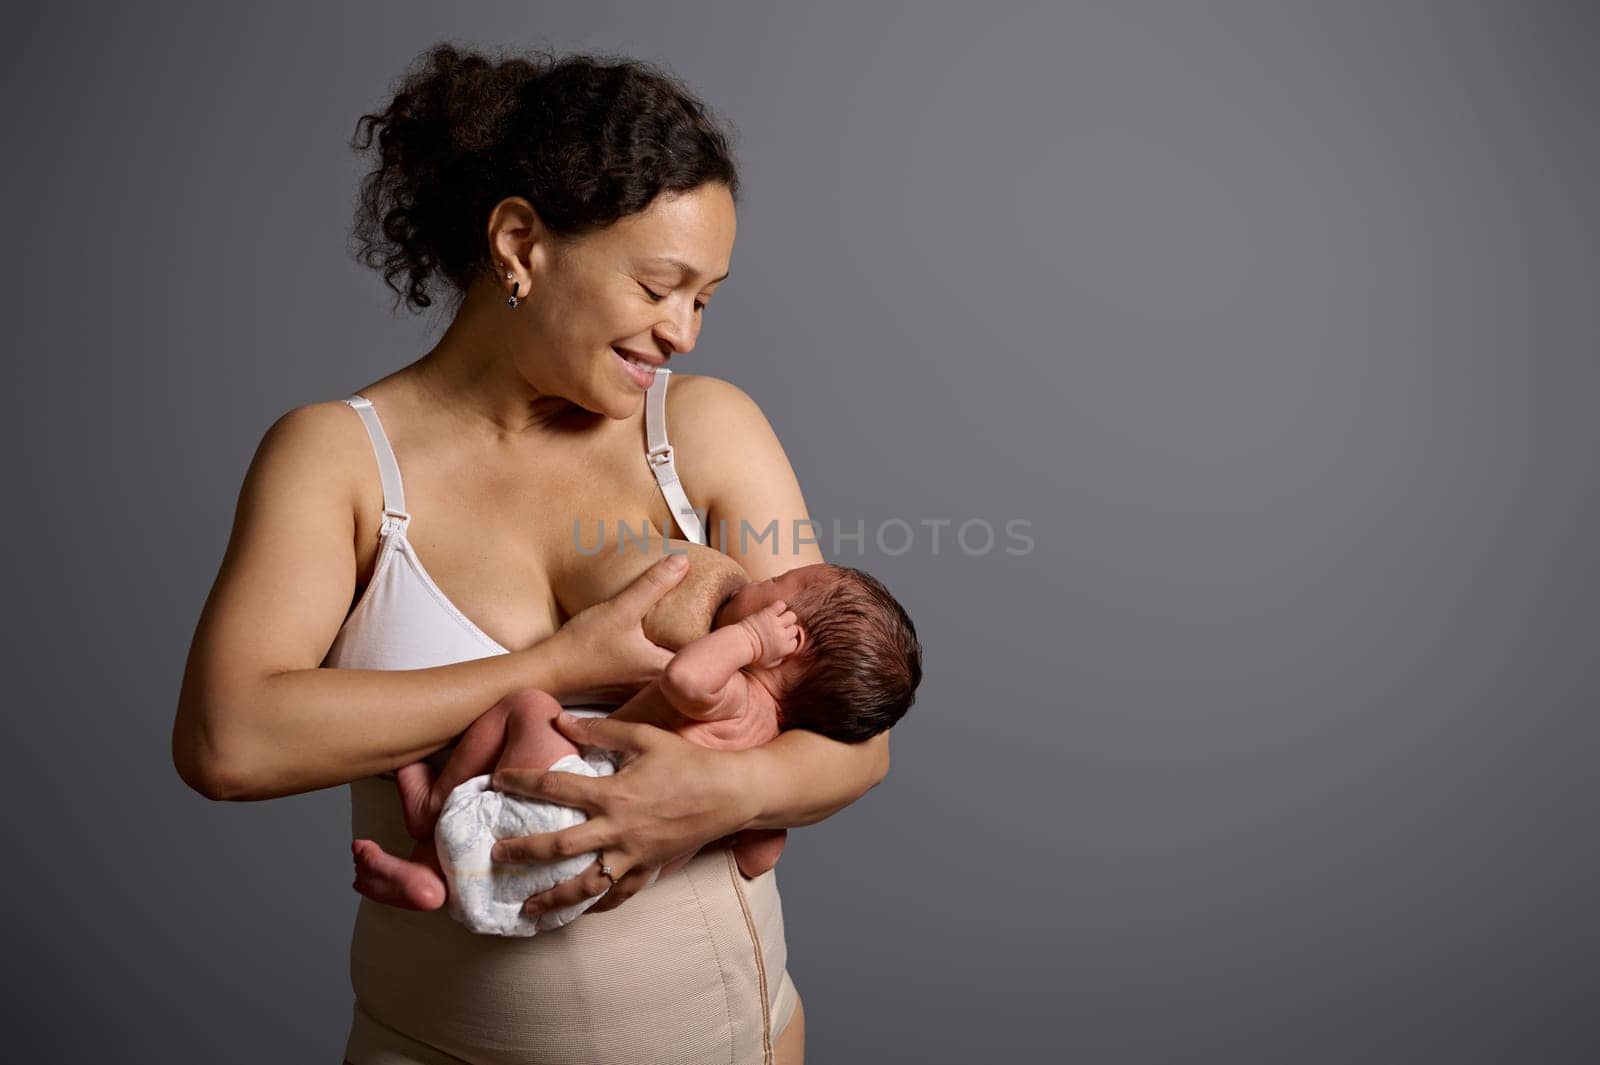 New mother feeds her newborn baby with breast milk, for healthy growth, smiling isolate on gray studio background by artgf